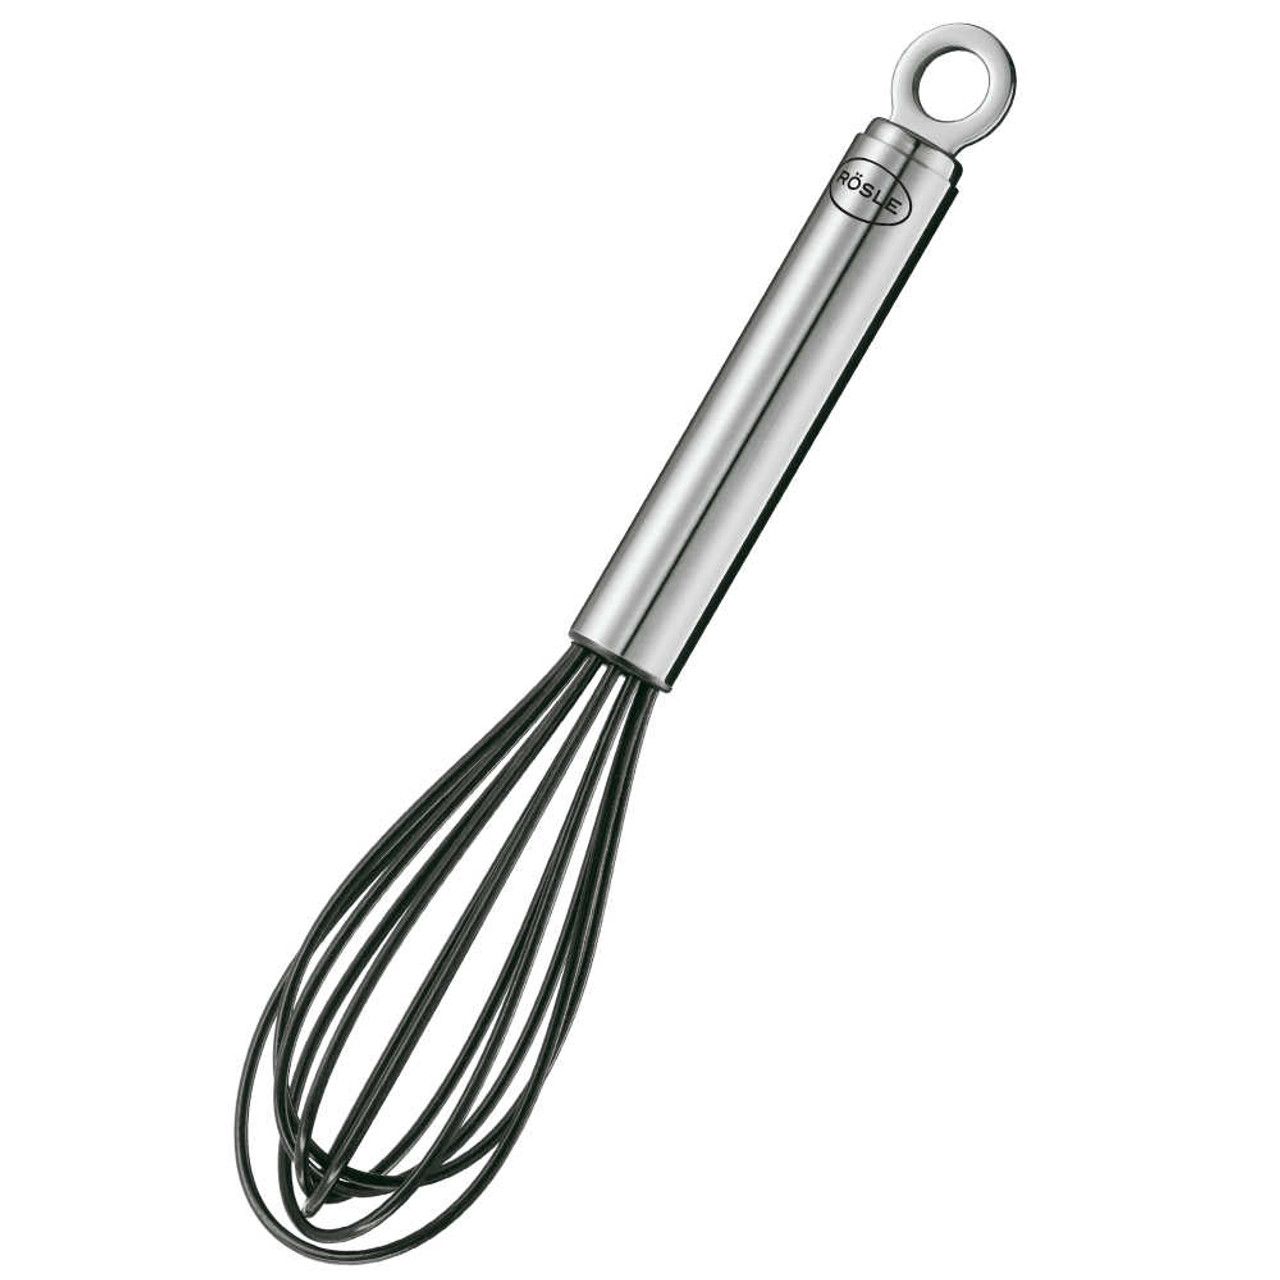 https://cdn11.bigcommerce.com/s-hccytny0od/images/stencil/1280x1280/products/4756/19412/Rosle_Silicone_Balloon_Whisk__87583.1652832166.jpg?c=2?imbypass=on